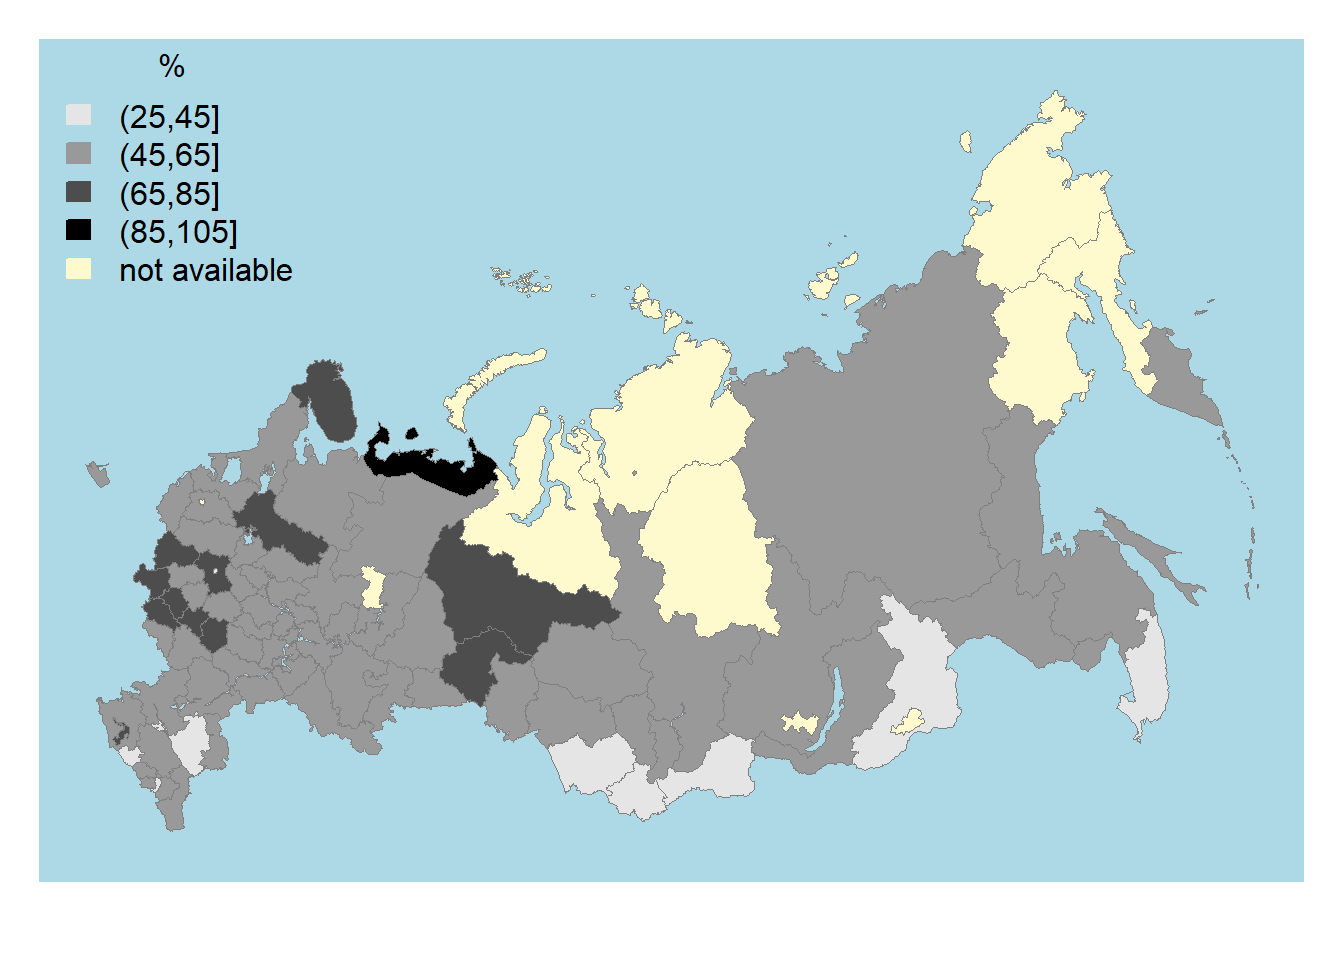 Housing affordability index by regions of Russia, 2017